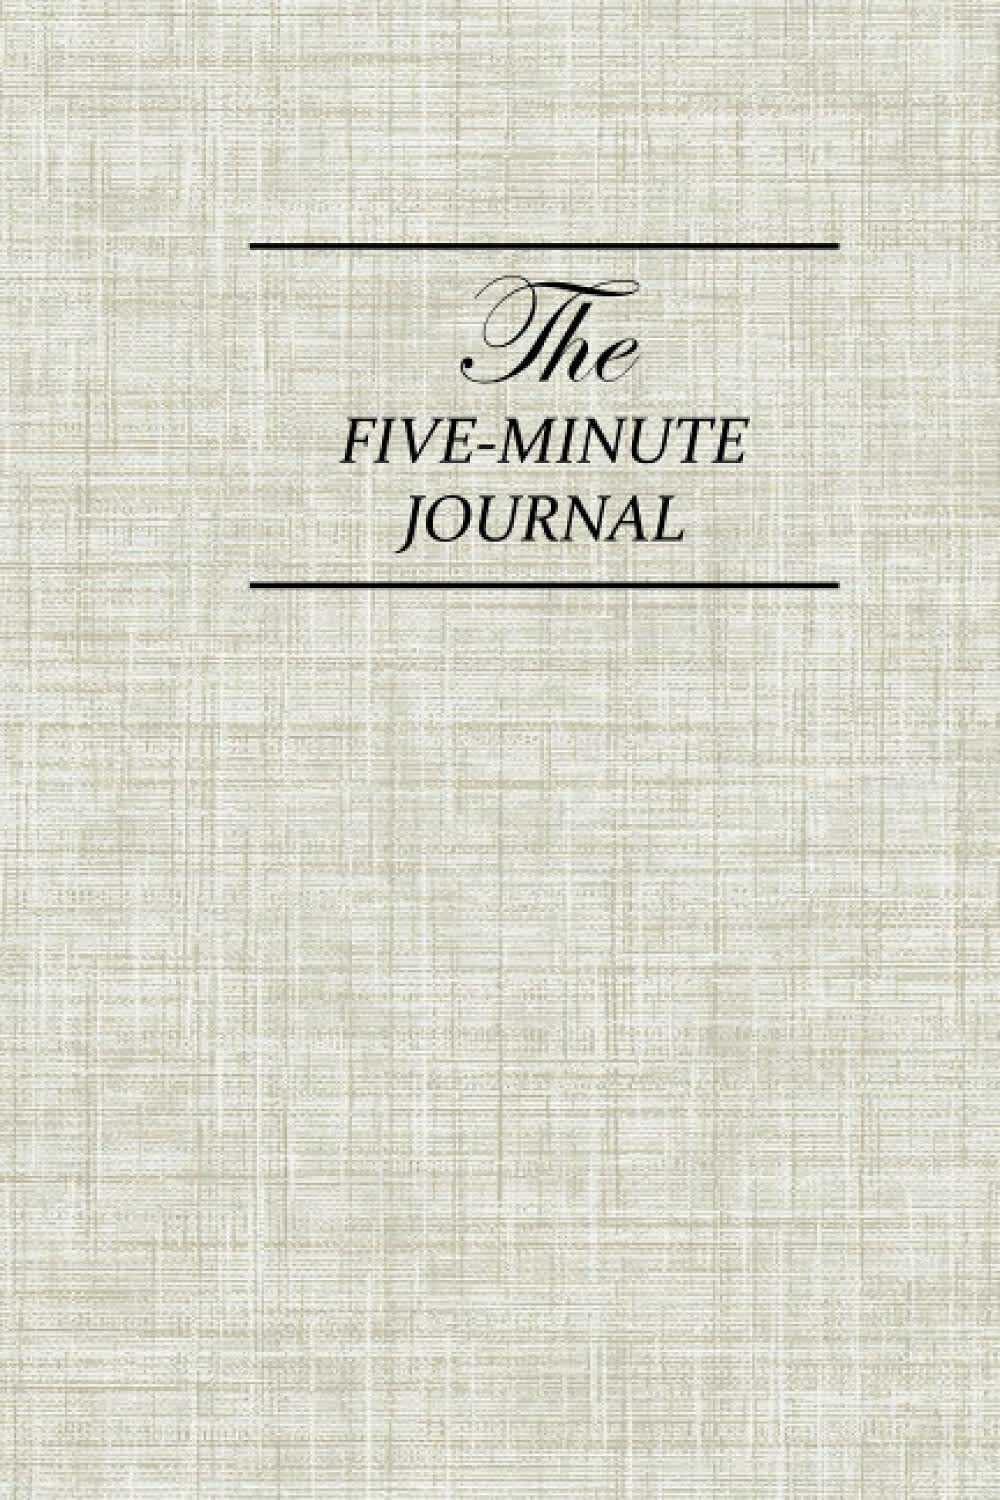 The Five-Minute Journal: Is It Worth $33.99 in 2023?